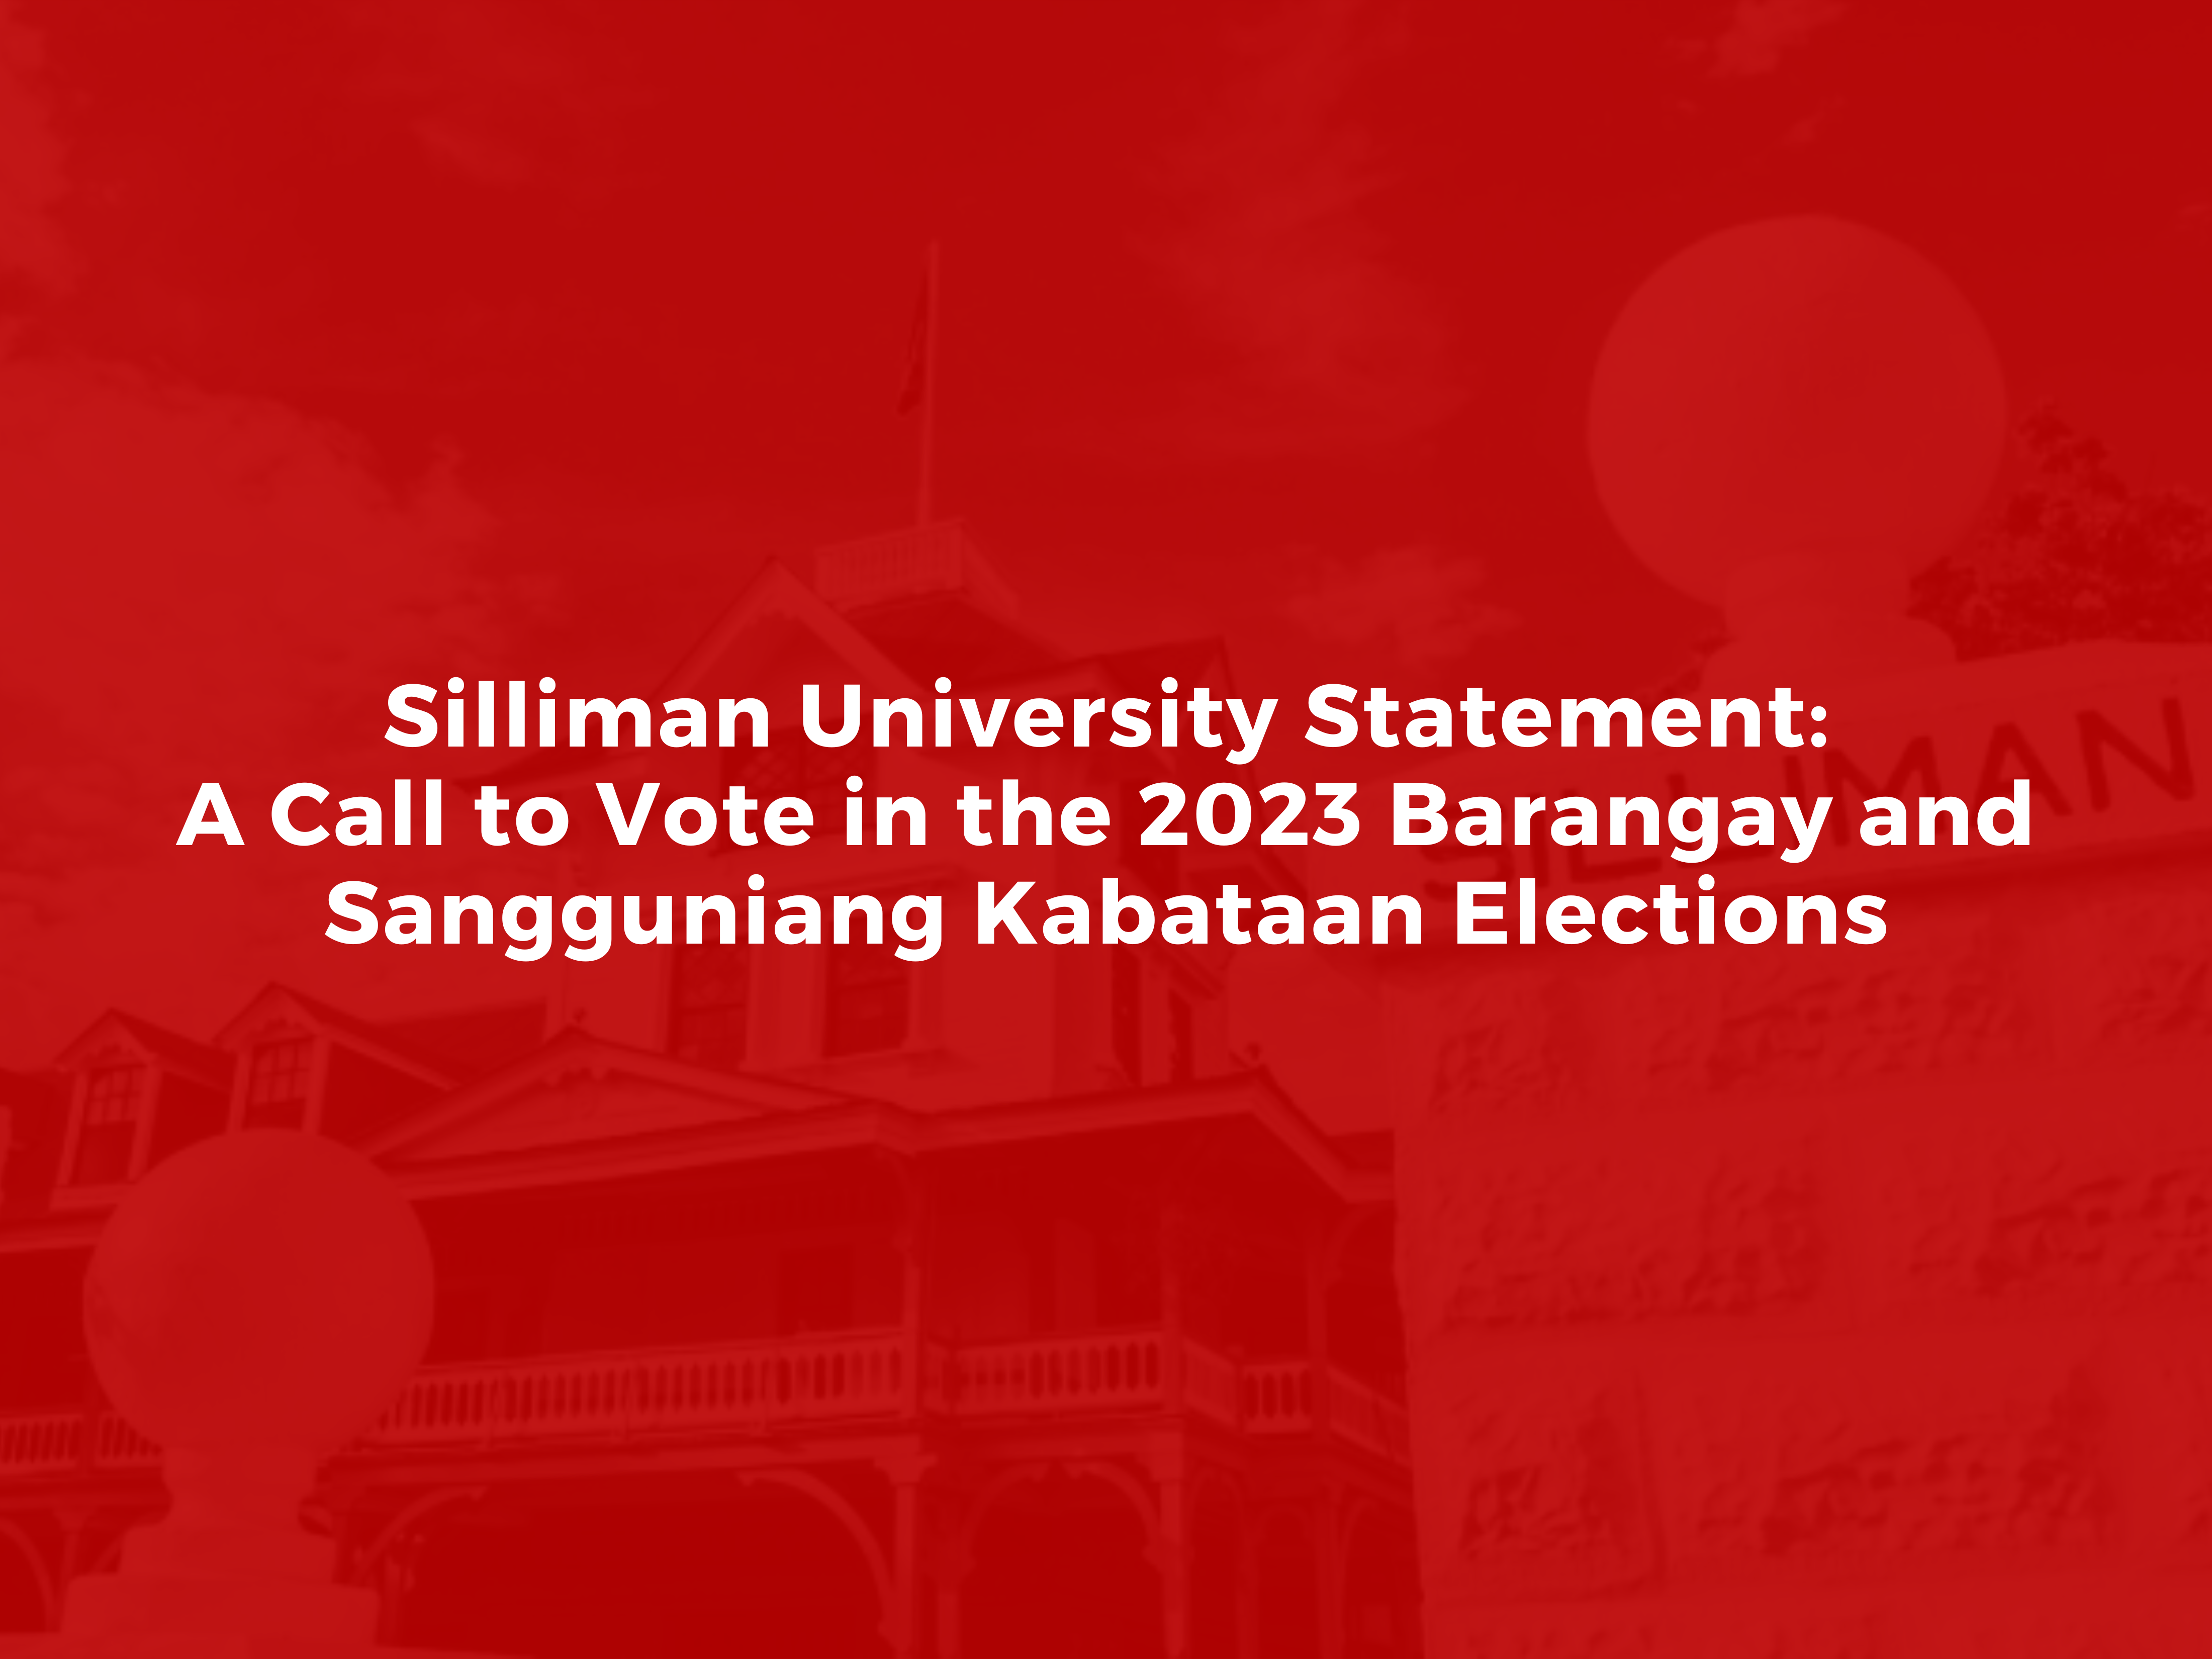 Silliman University Statement: A Call to Vote in the 2023 Barangay and  Sangguniang Kabataan Elections